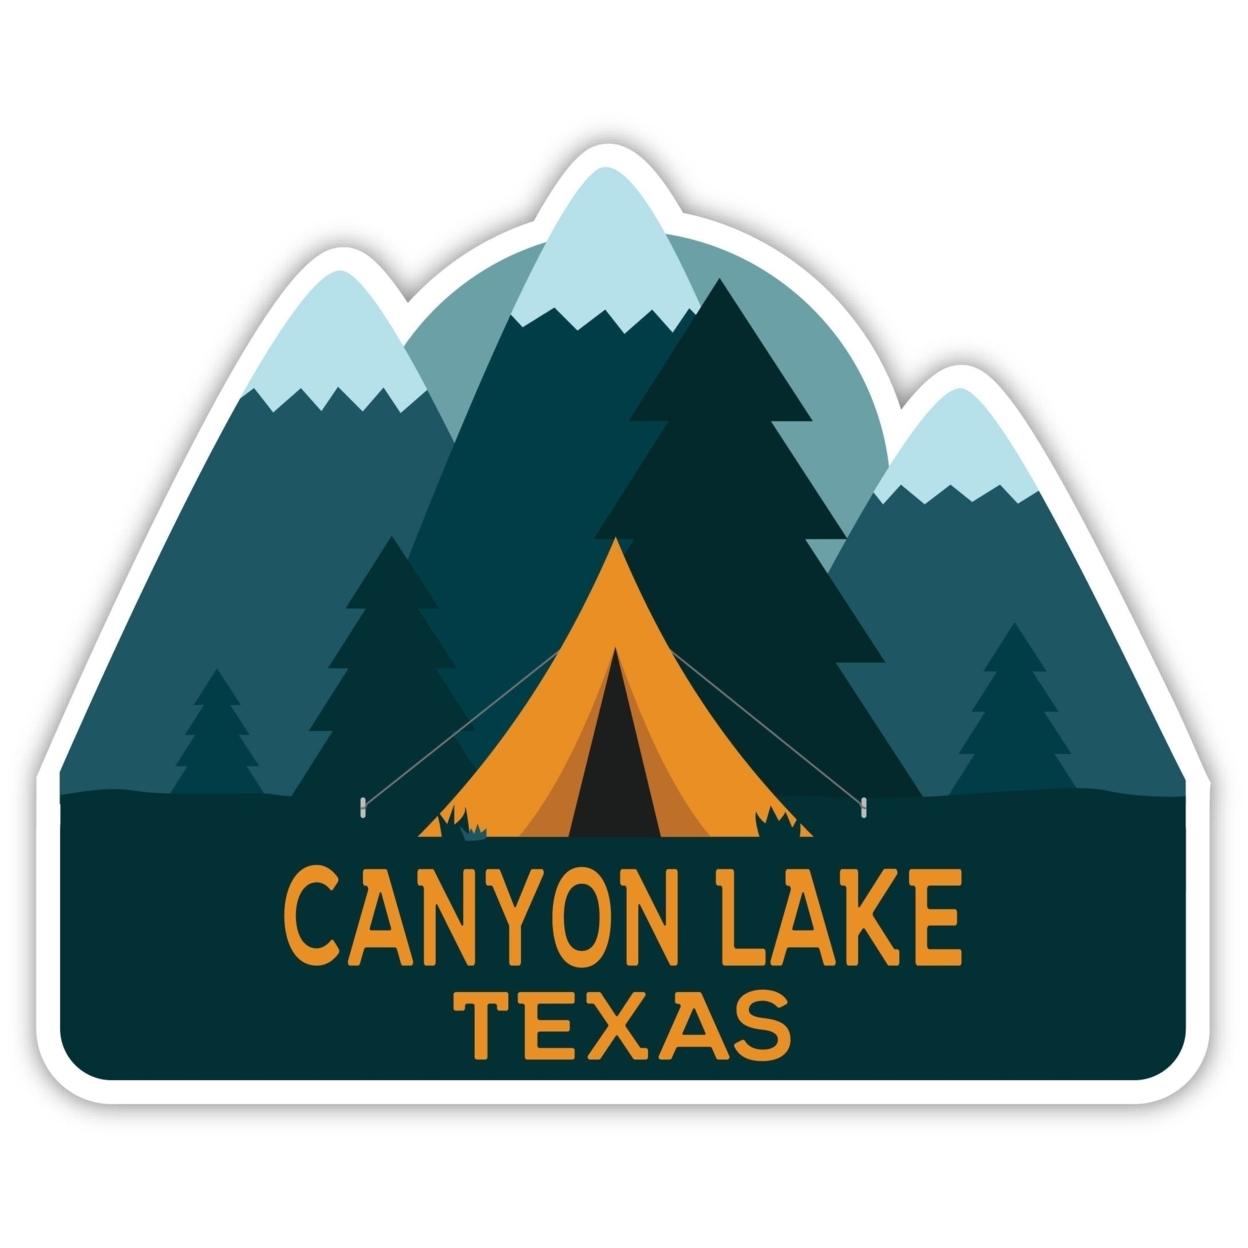 Canyon Lake Texas Souvenir Decorative Stickers (Choose Theme And Size) - 4-Pack, 2-Inch, Camp Life